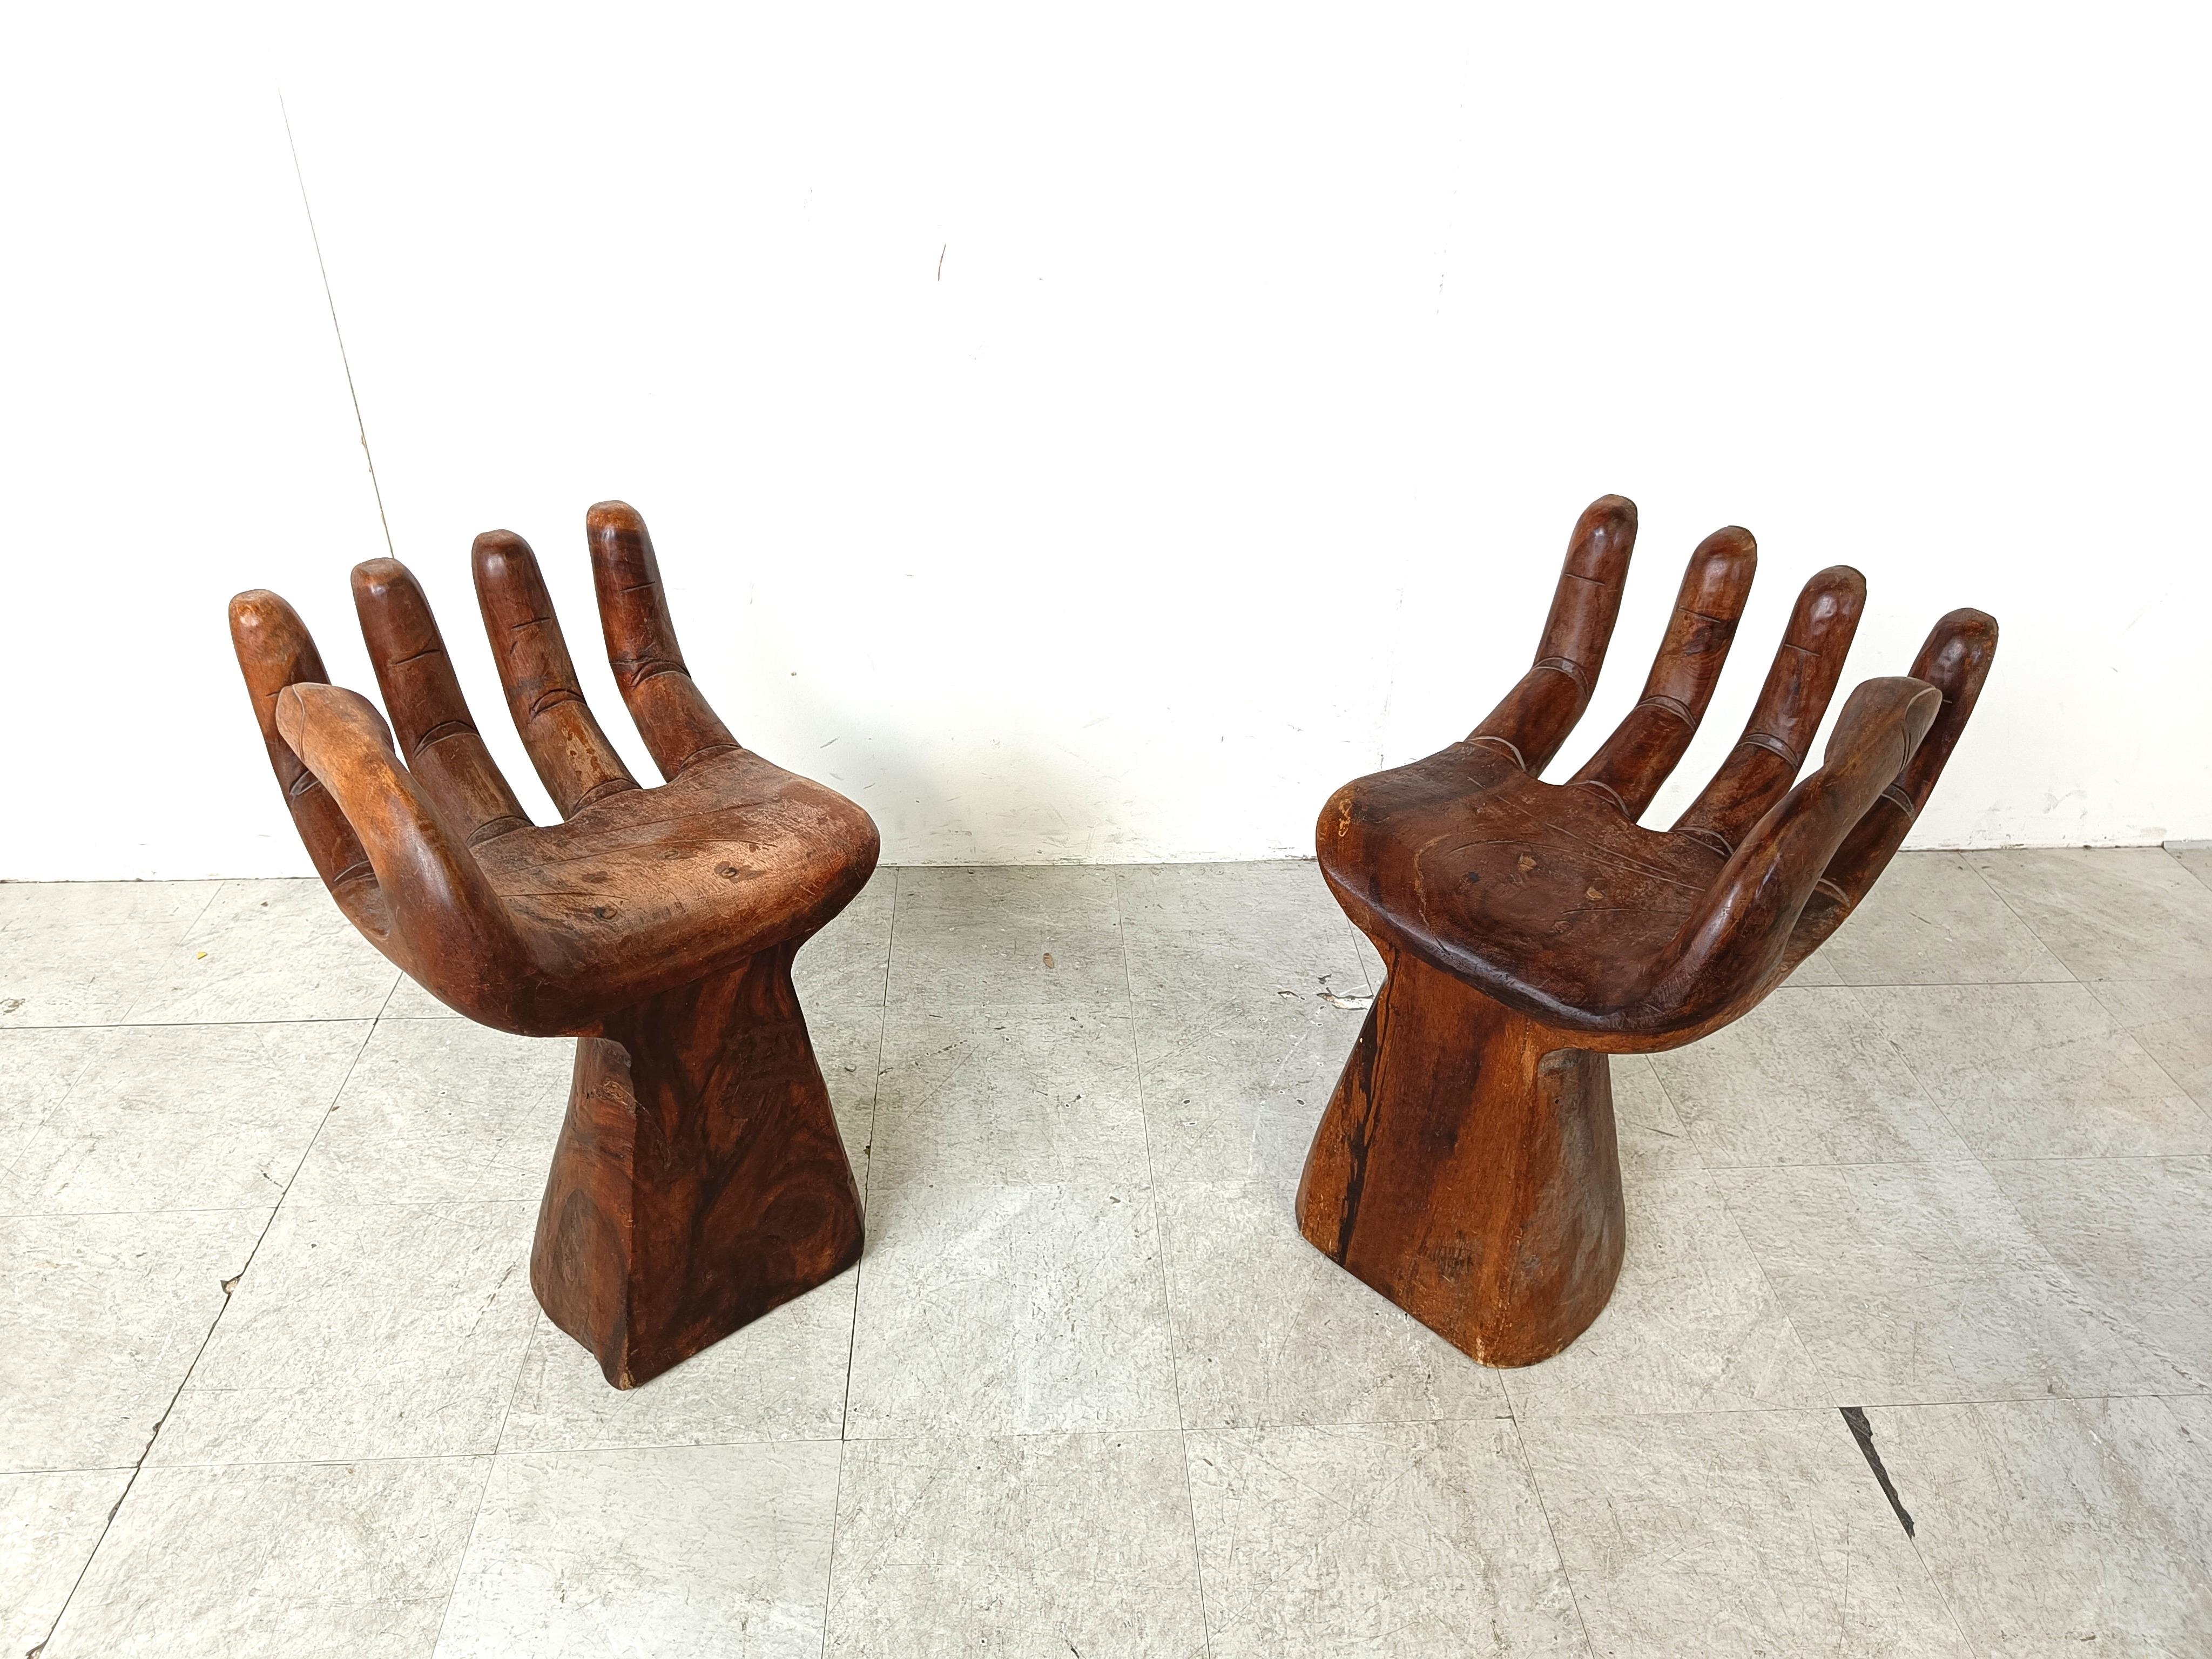 Vintage solid teak wooden sculpted hand chairs.

Beautifully made chairs, very decorative as a pair.

1970s - Asia

Good overall condition

Dimensions:
Height: 68cm
width: 40cm
Depth: 50cm
Seat height: 46cm

Ref.: 201342

*Price is for the pair